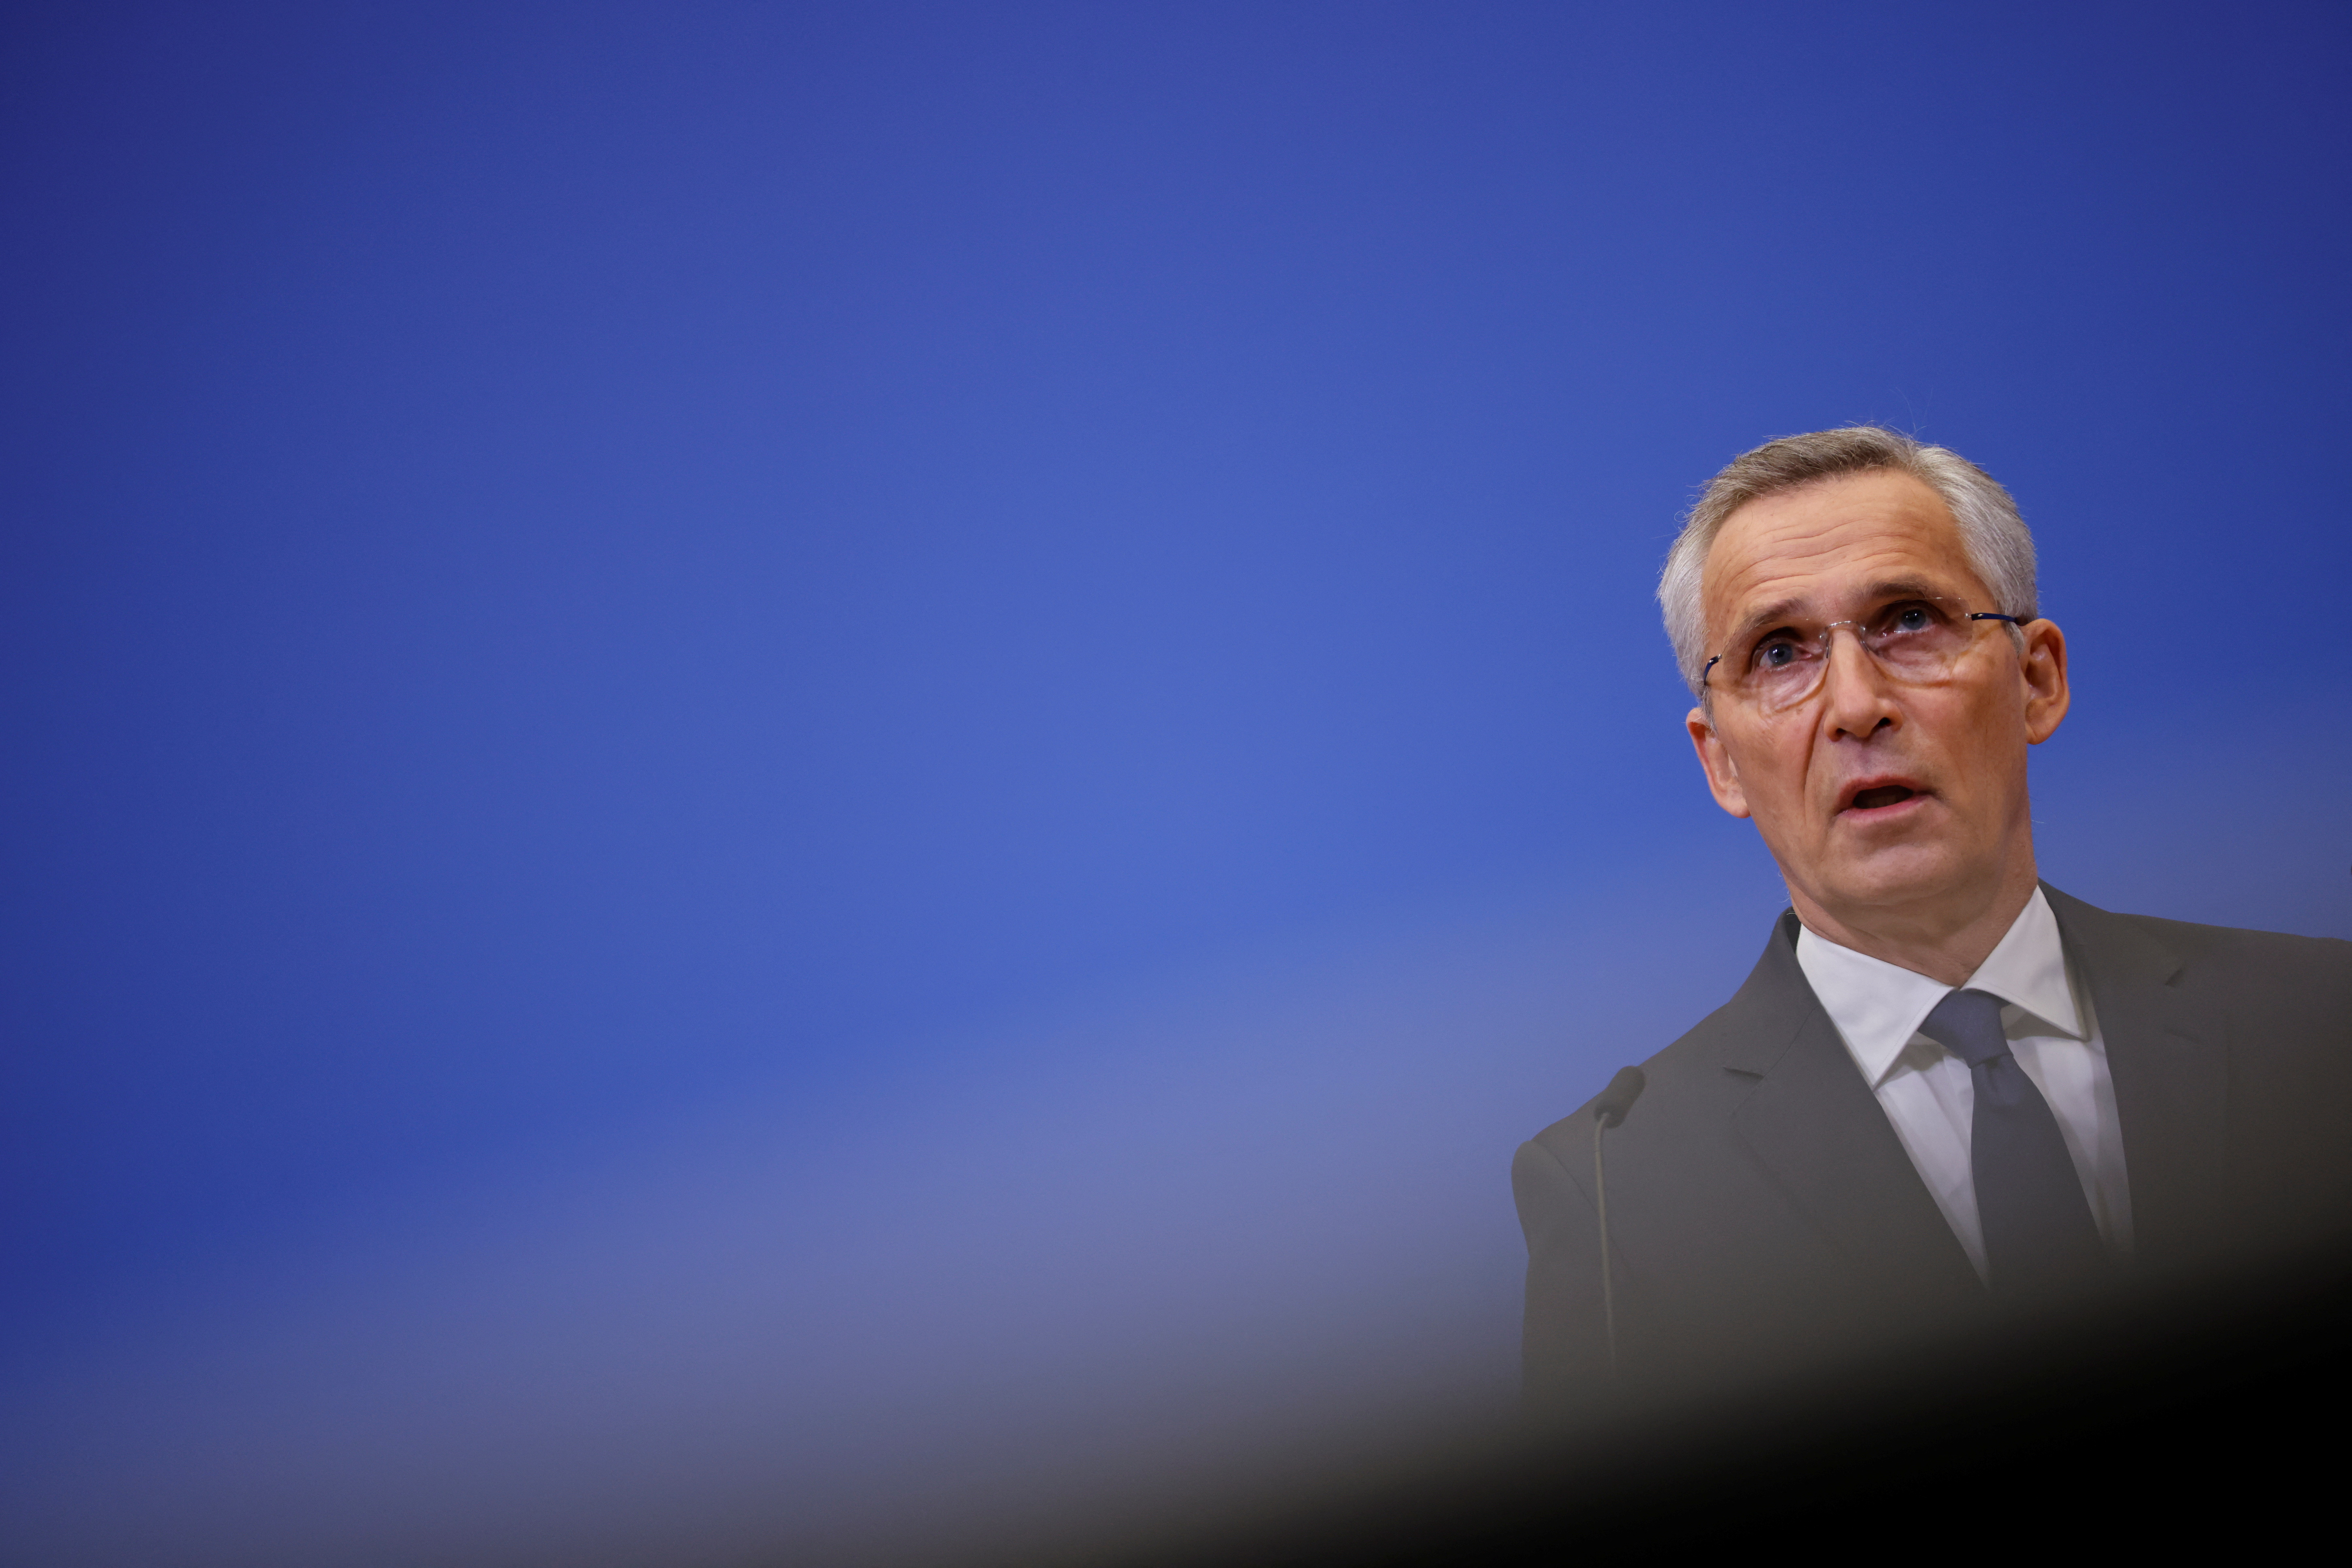 NATO Secretary General Stoltenberg holds a press conference in Brussels